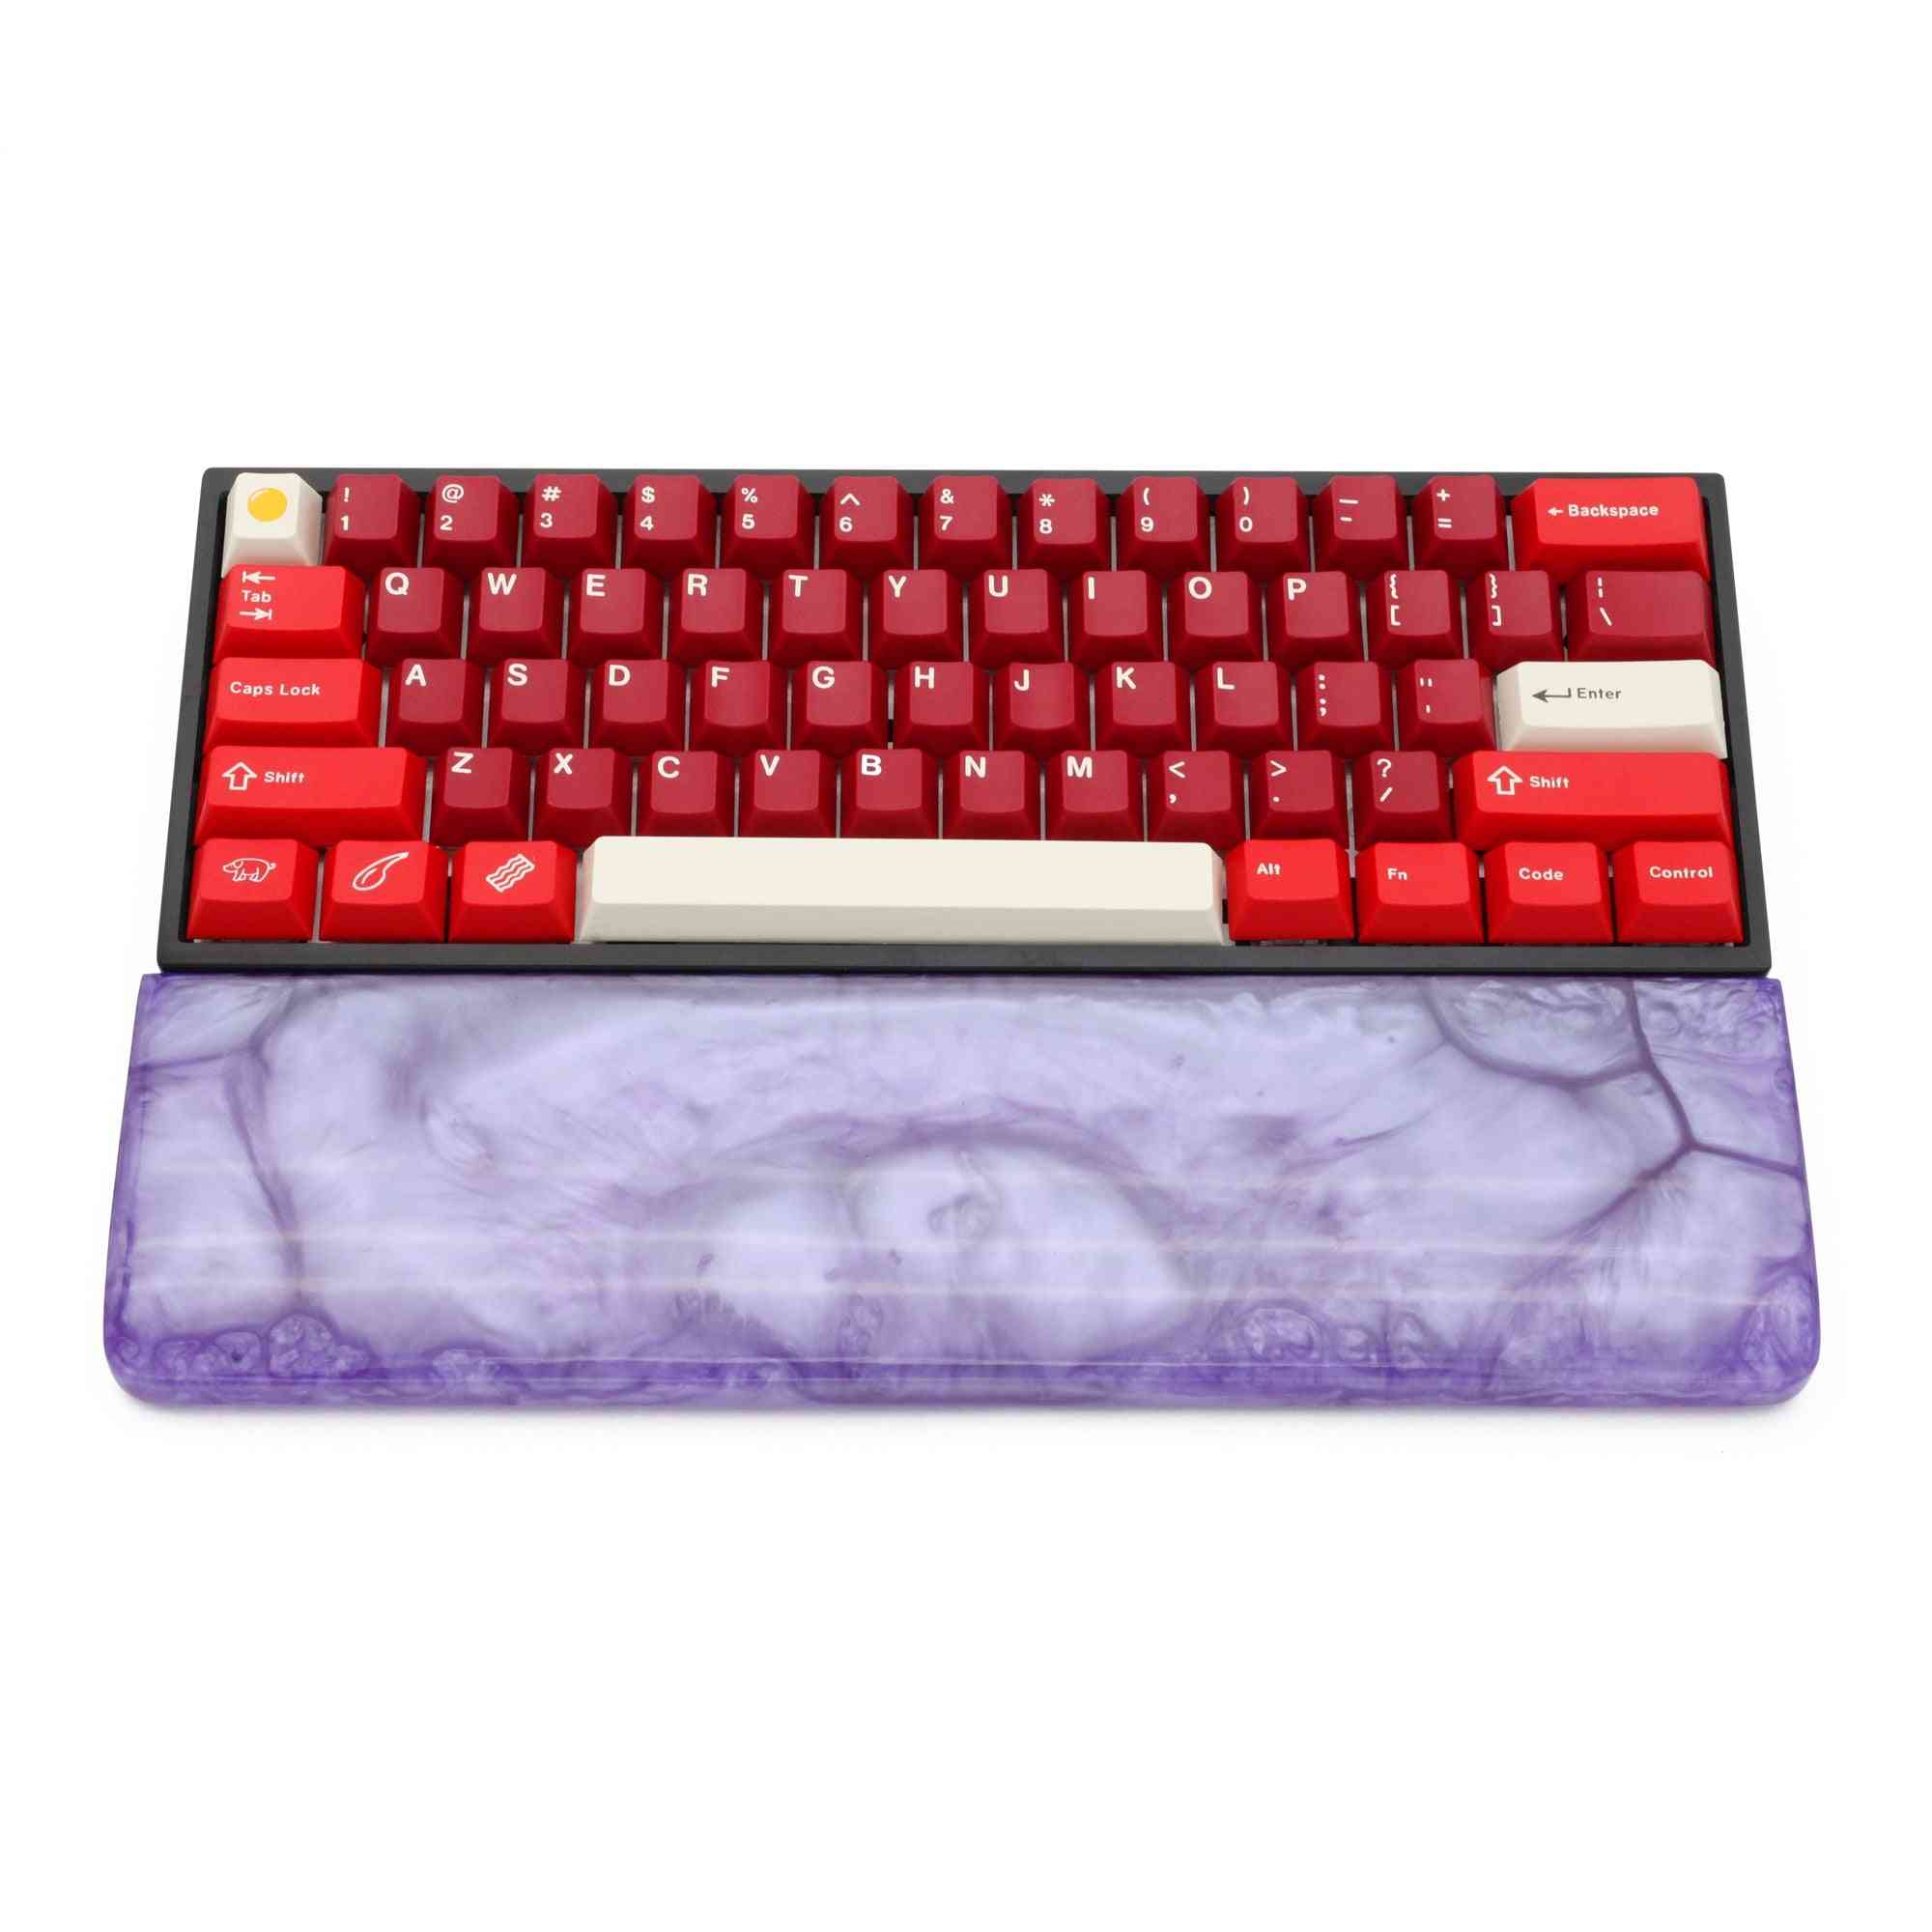 Resin Rest Handmade Wrist With Rubber Feet For Mechanical Keyboards